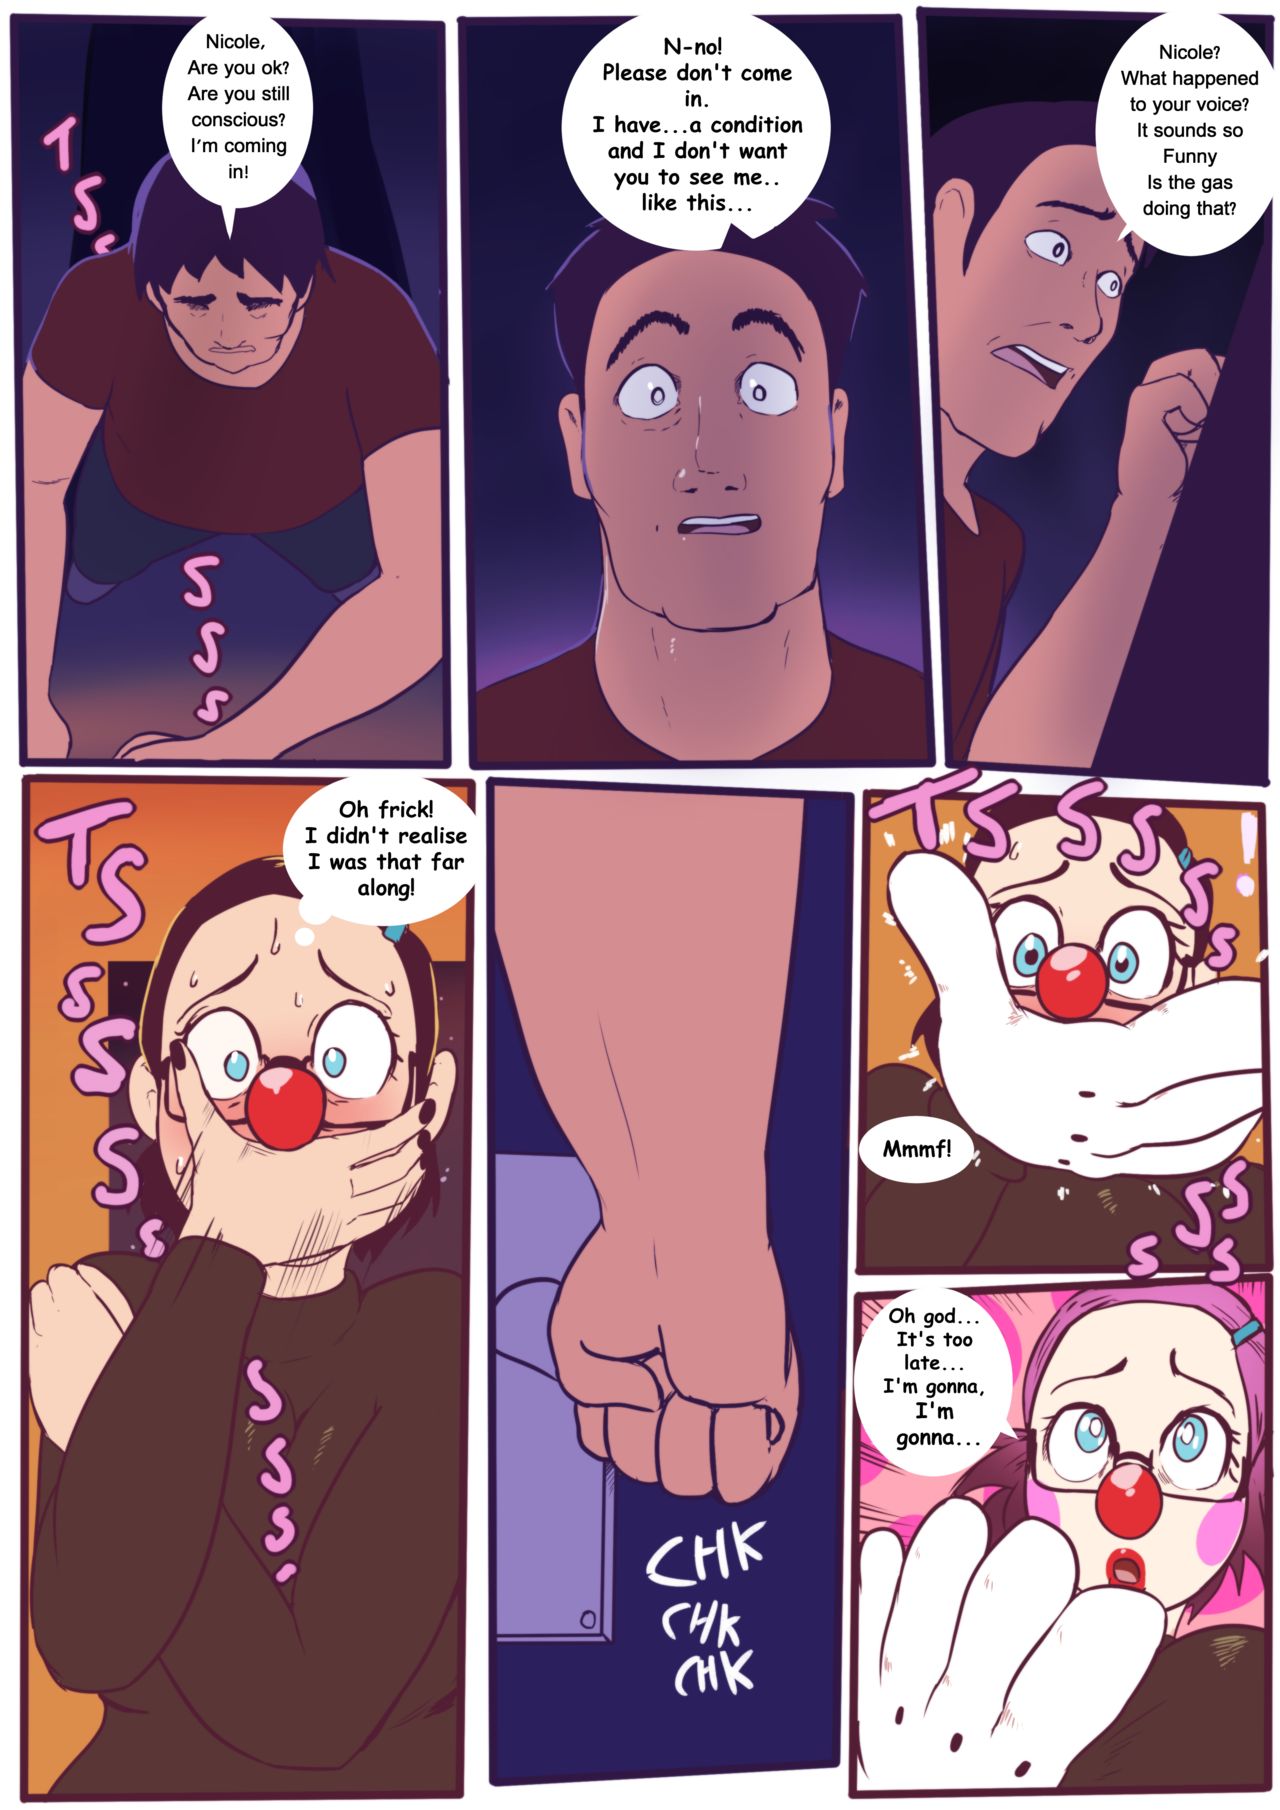 A Perfectly Normal Comic Where Nothing Weird Happens Lemonfont 09